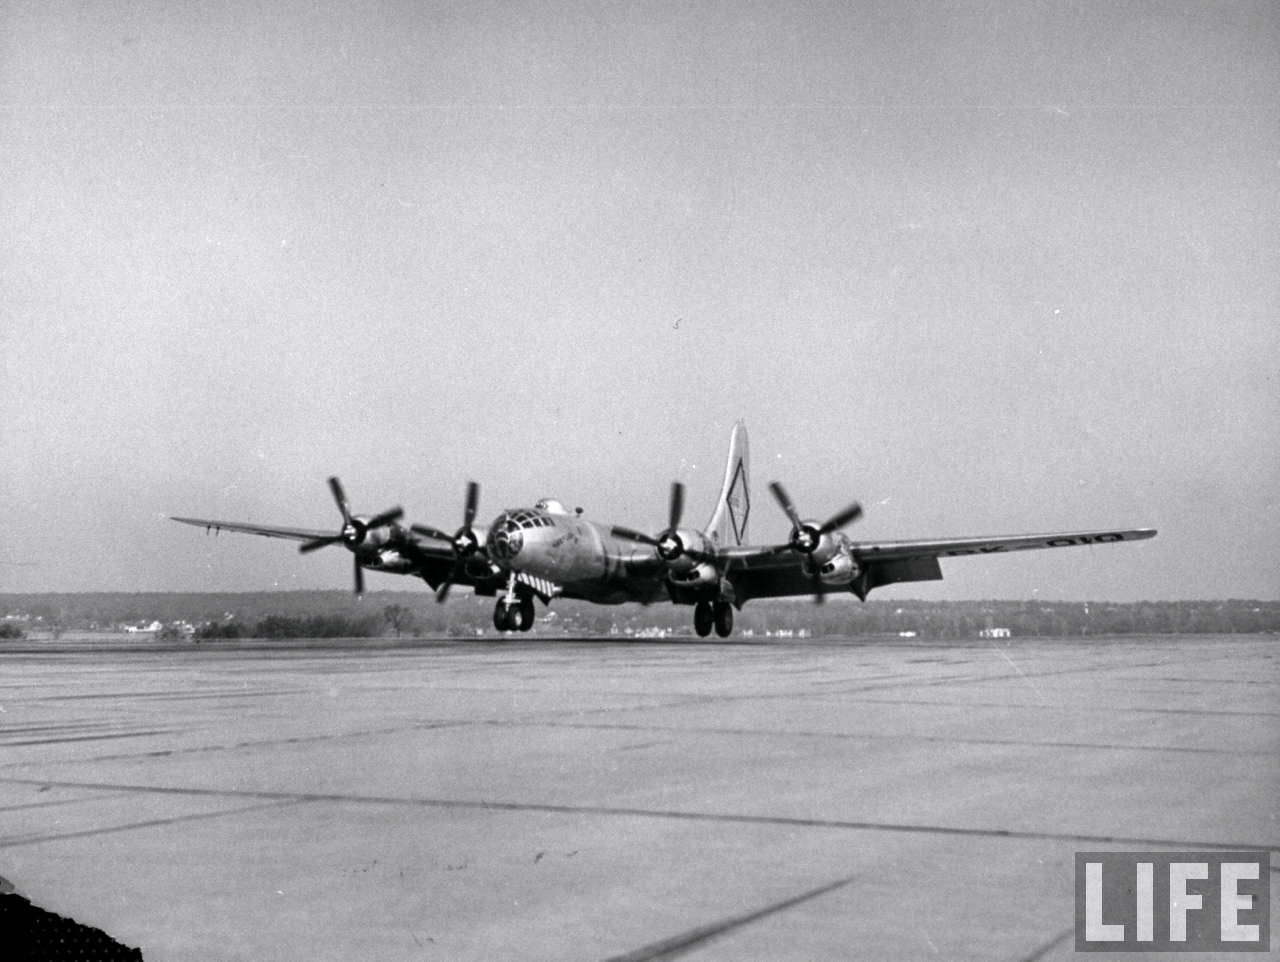 Boeing B-50A-5-BO Superfortress 46-010, Lucky Lady II, lands at Carswell Air Force Base, Fort Worth Texas, at 10:31 a.m., 2 March 1949. (LIFE Magazine)